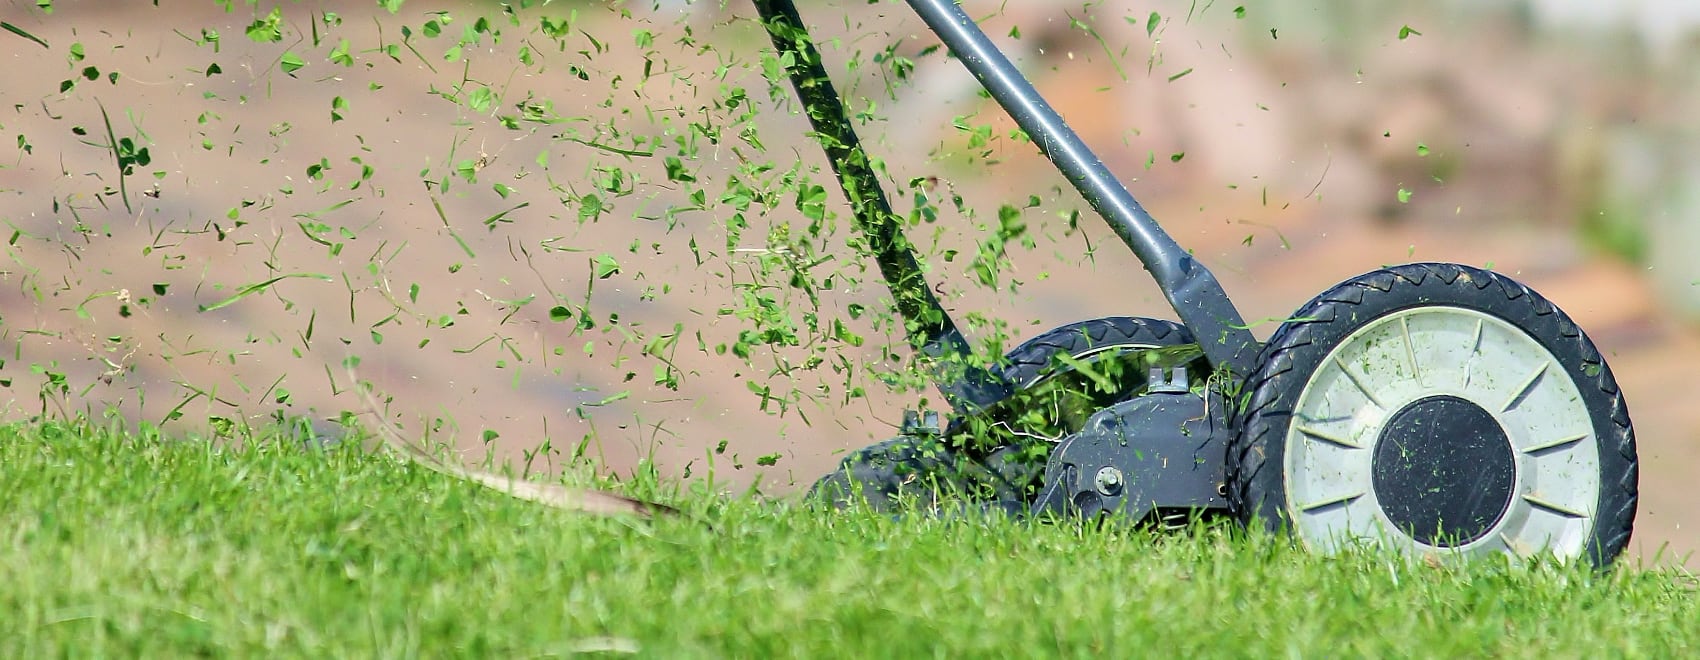 11 Best Lawn Aerators with Lawn Aeration Explained